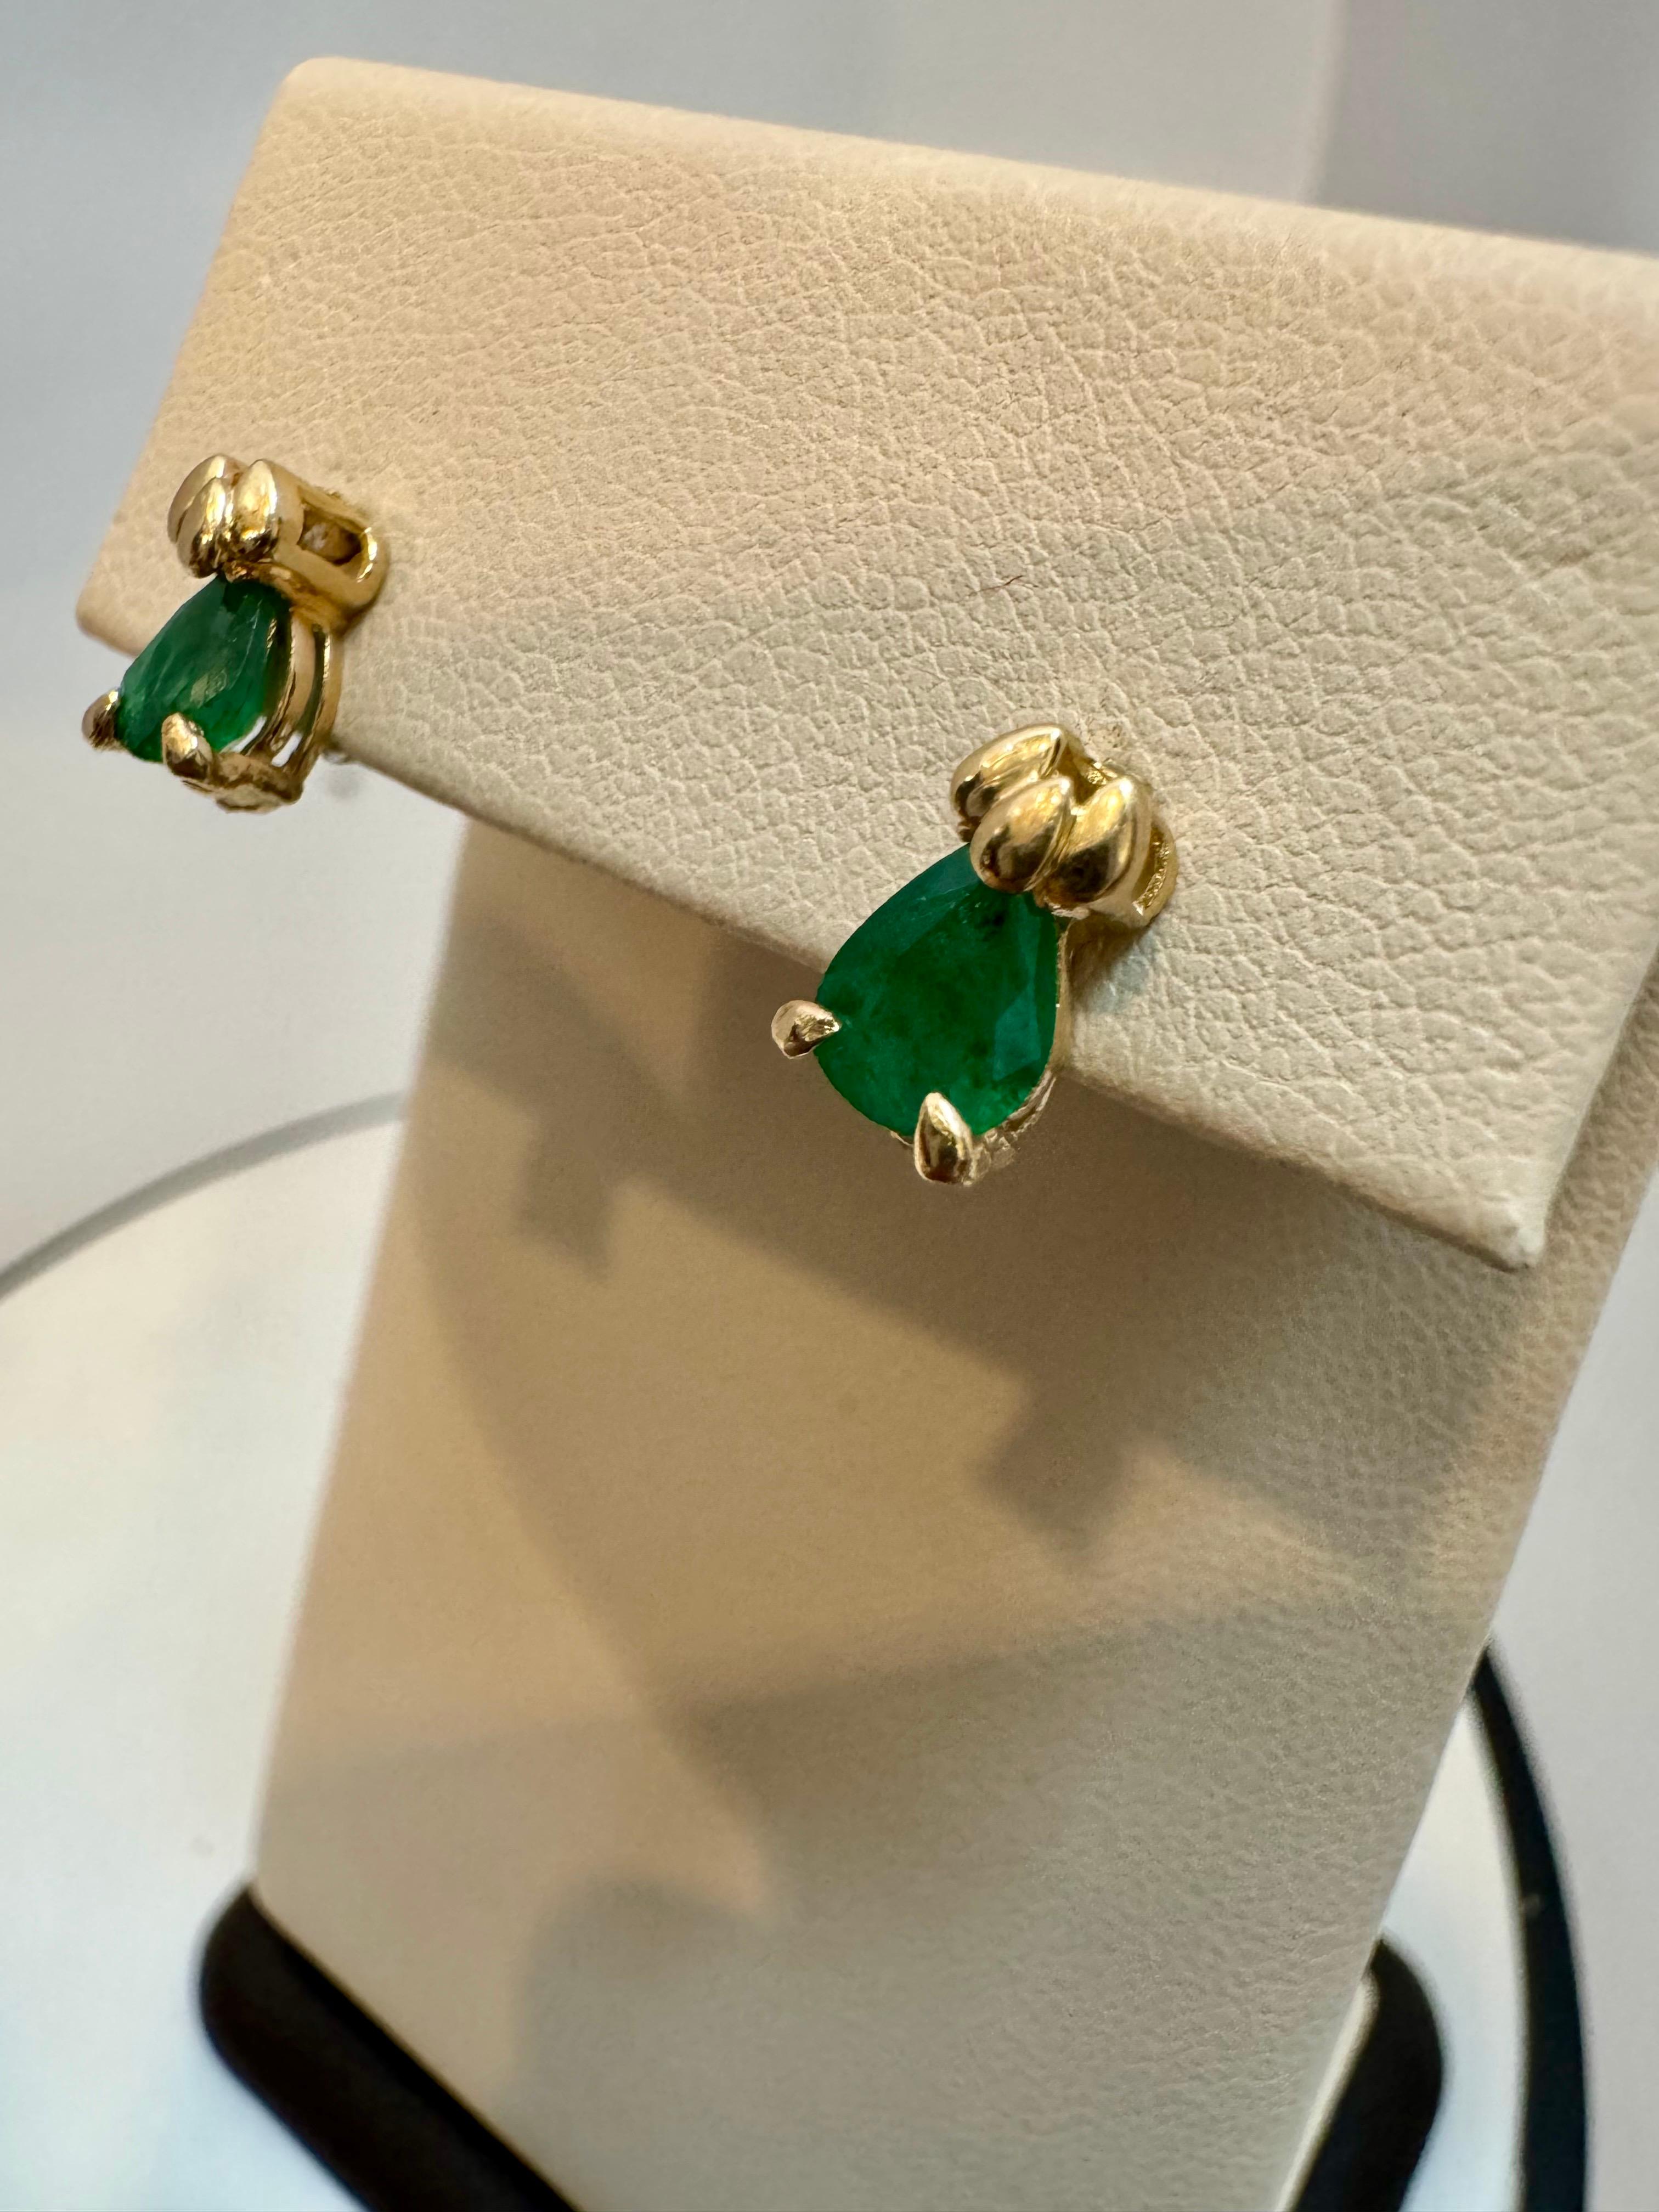 Natural Pear Shape Emerald Post Earrings 14 Karat Yellow Gold In Excellent Condition For Sale In New York, NY